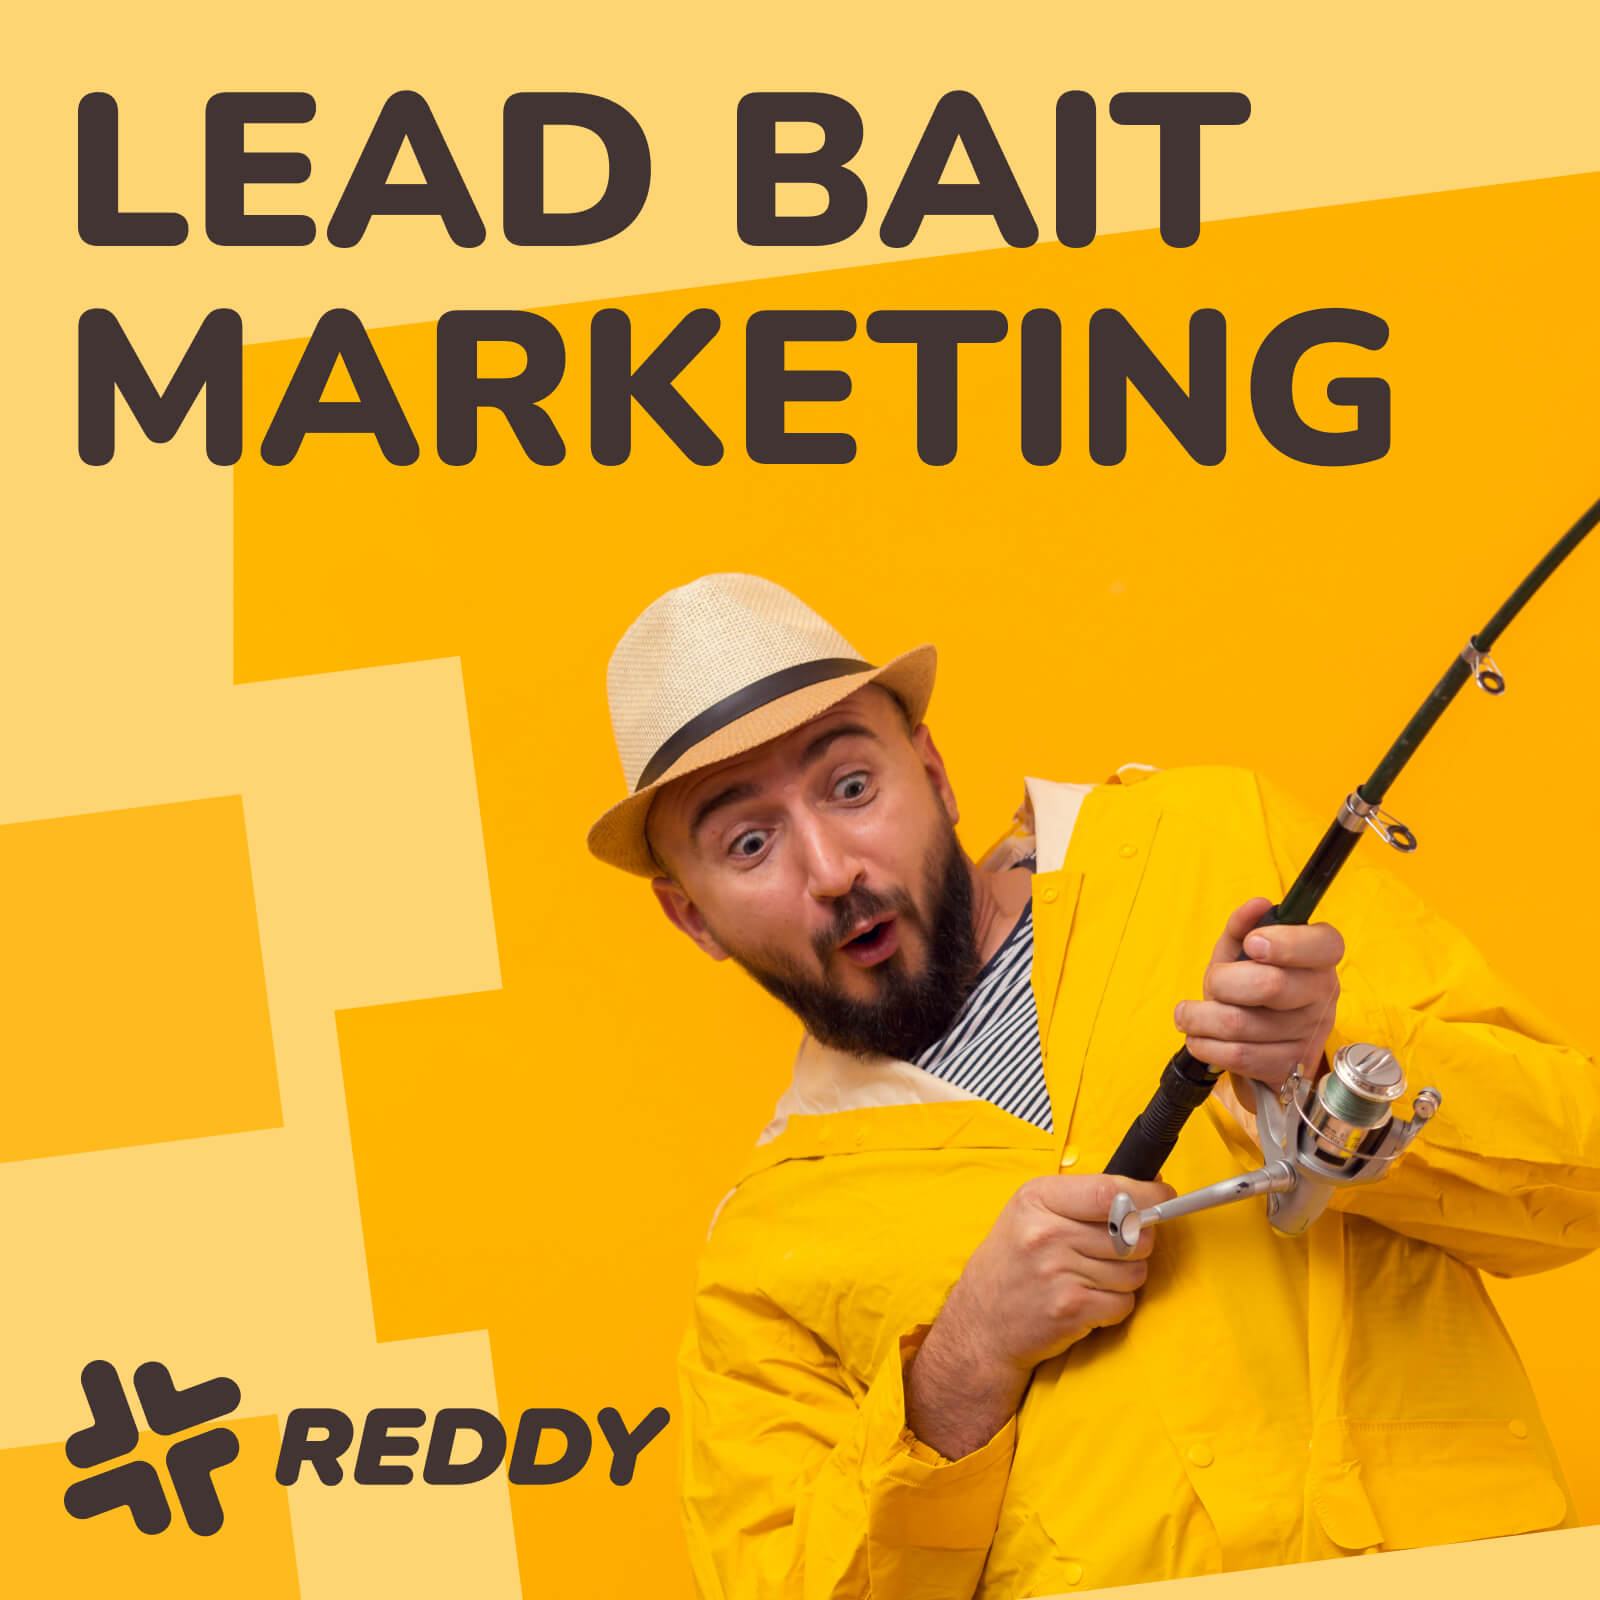 Man in yellow fishermans jacket holding a fishing rod as if he is reeling in some leads from his marketing bait